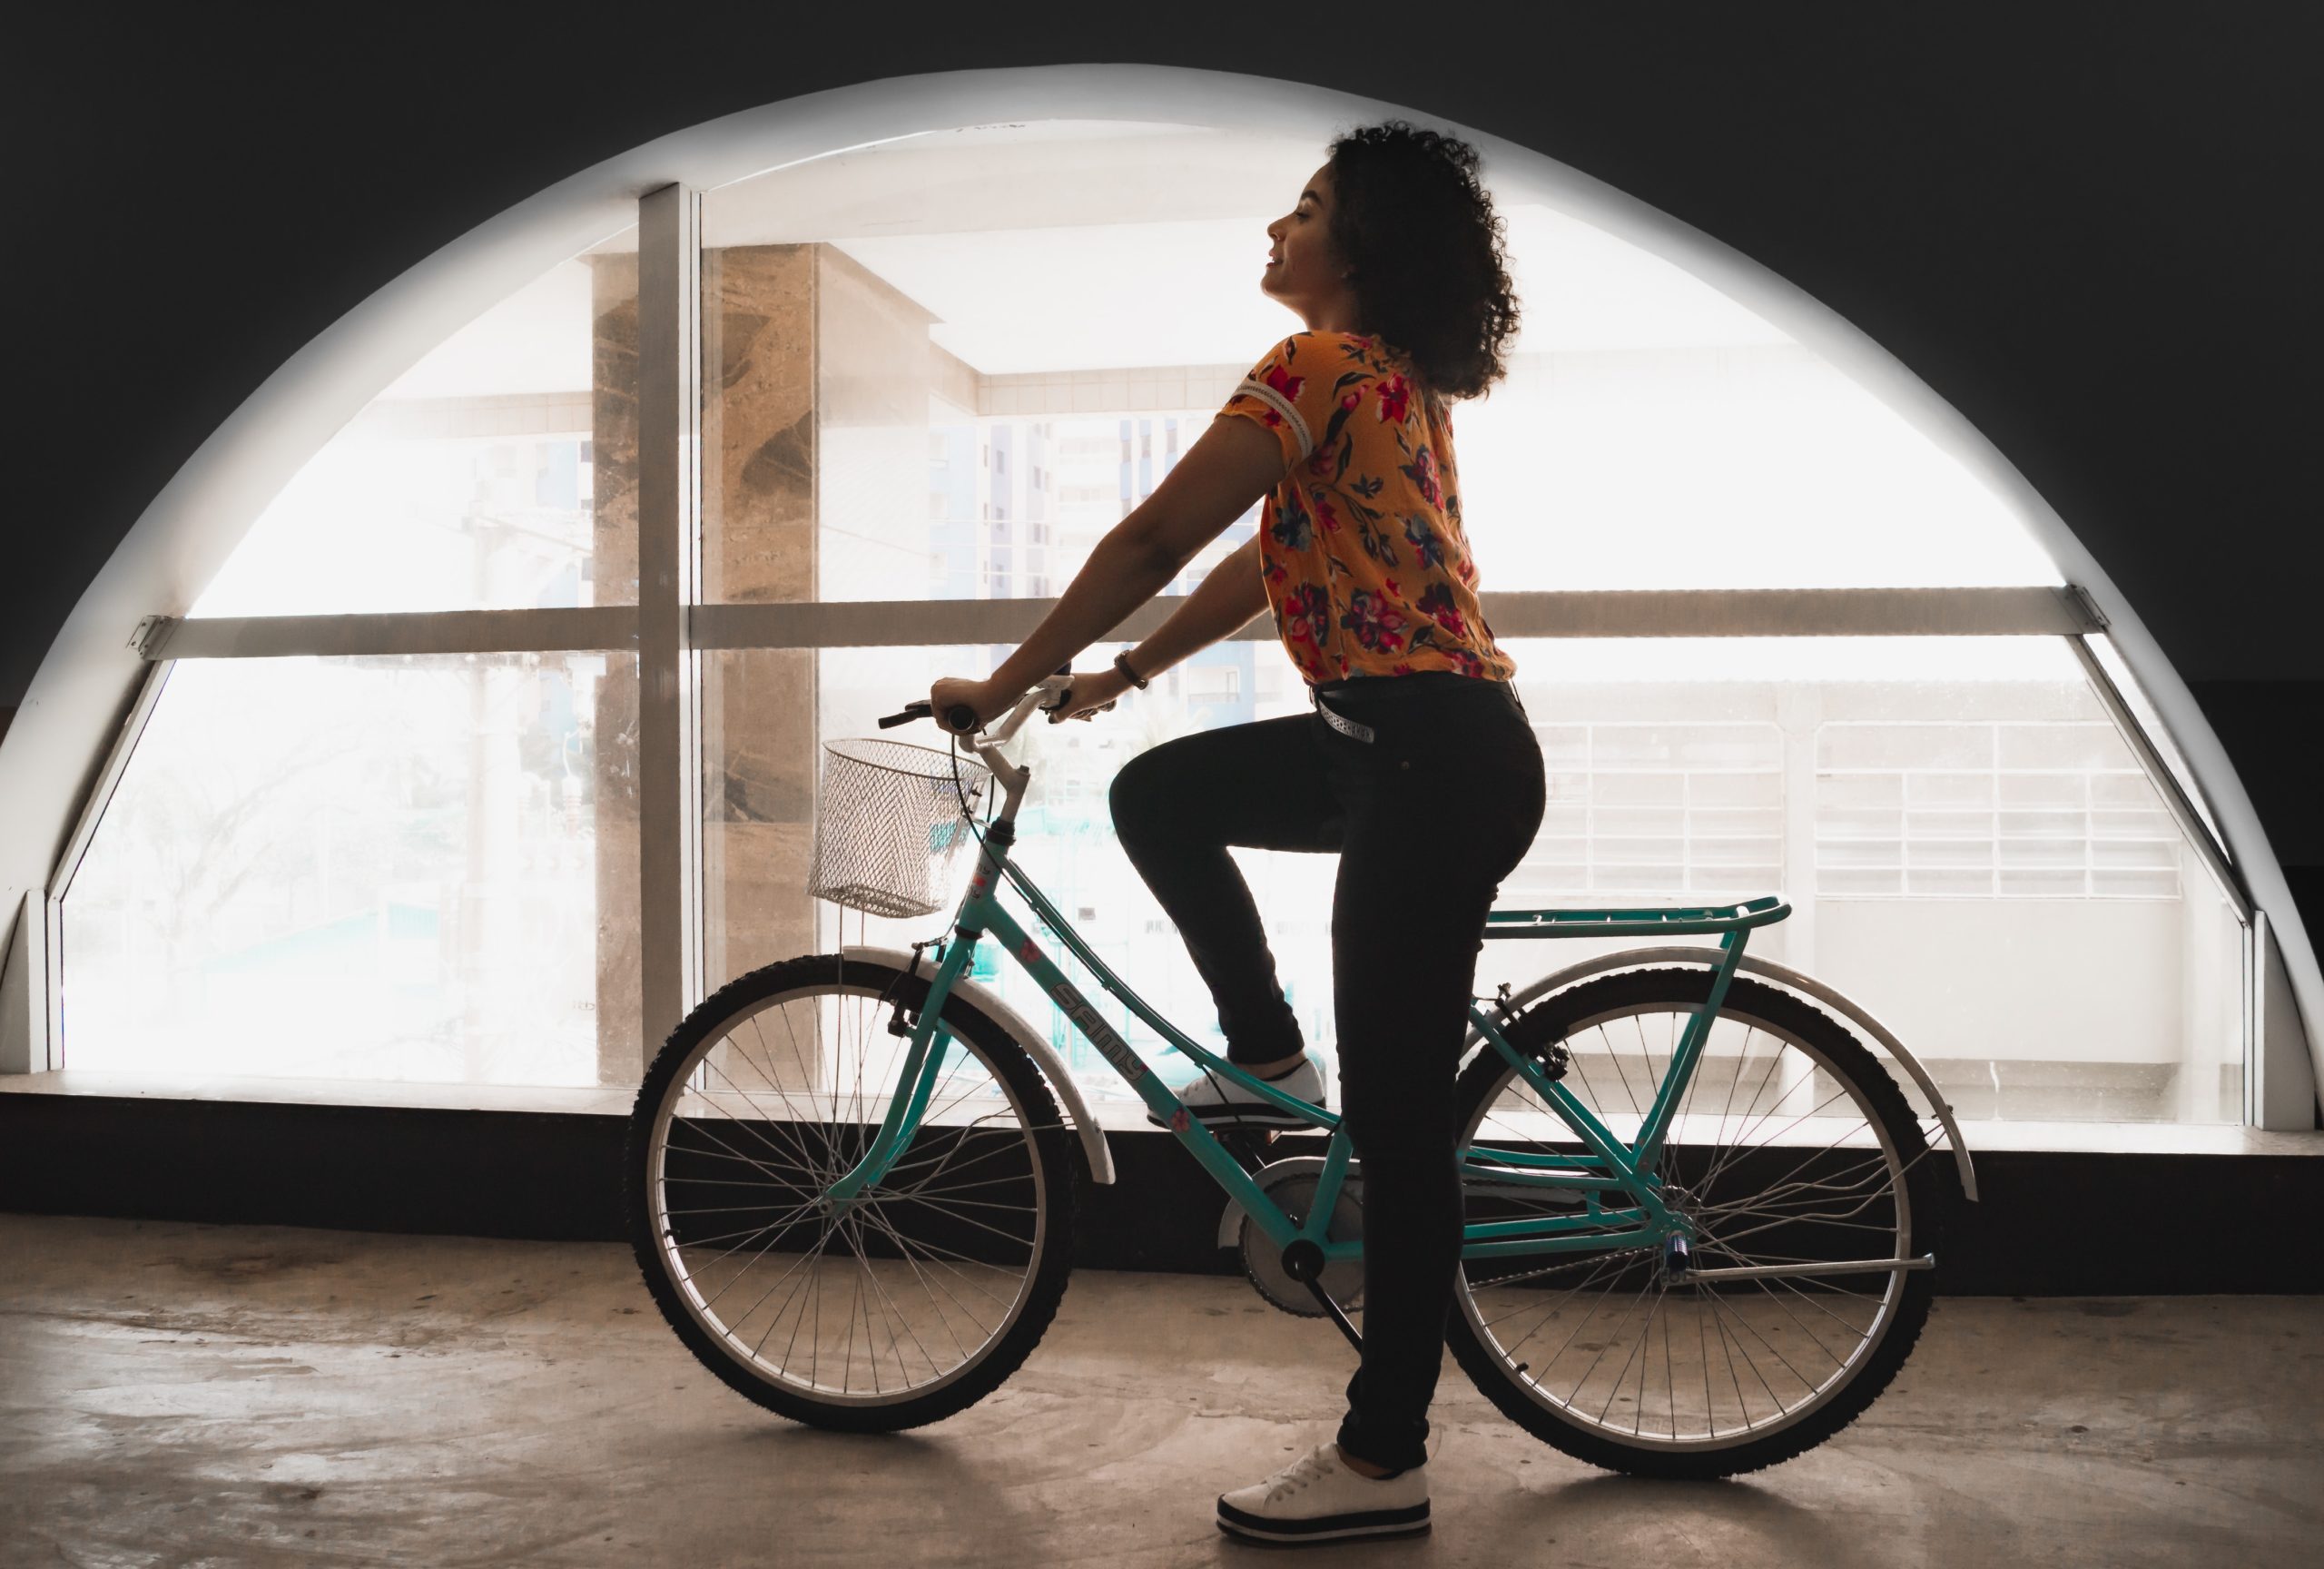 A woman is riding a bicycle past a semi-circle-shaped window.